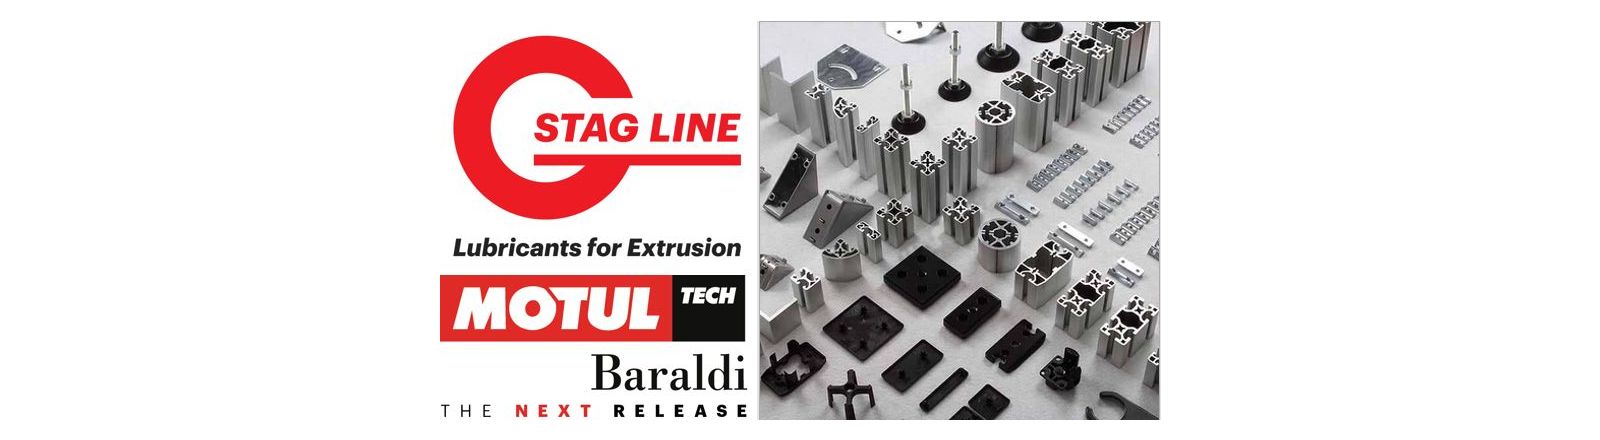 STAG LINE: A COMPLETE RANGE OF PRODUCTS FOR EXTRUSION